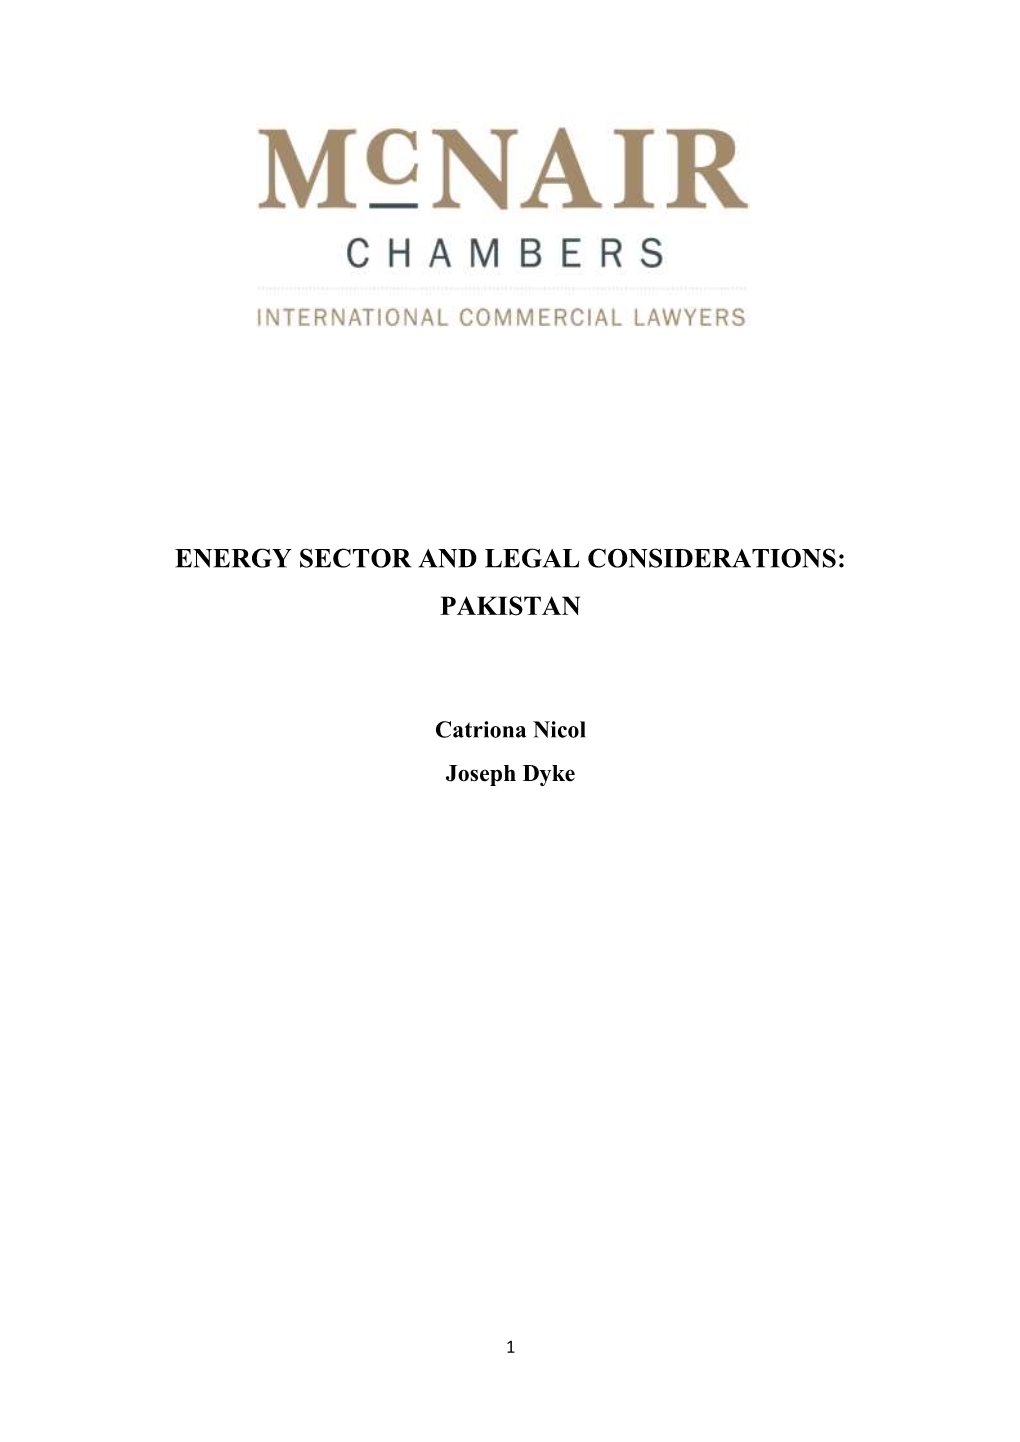 Energy Sector and Legal Considerations: Pakistan